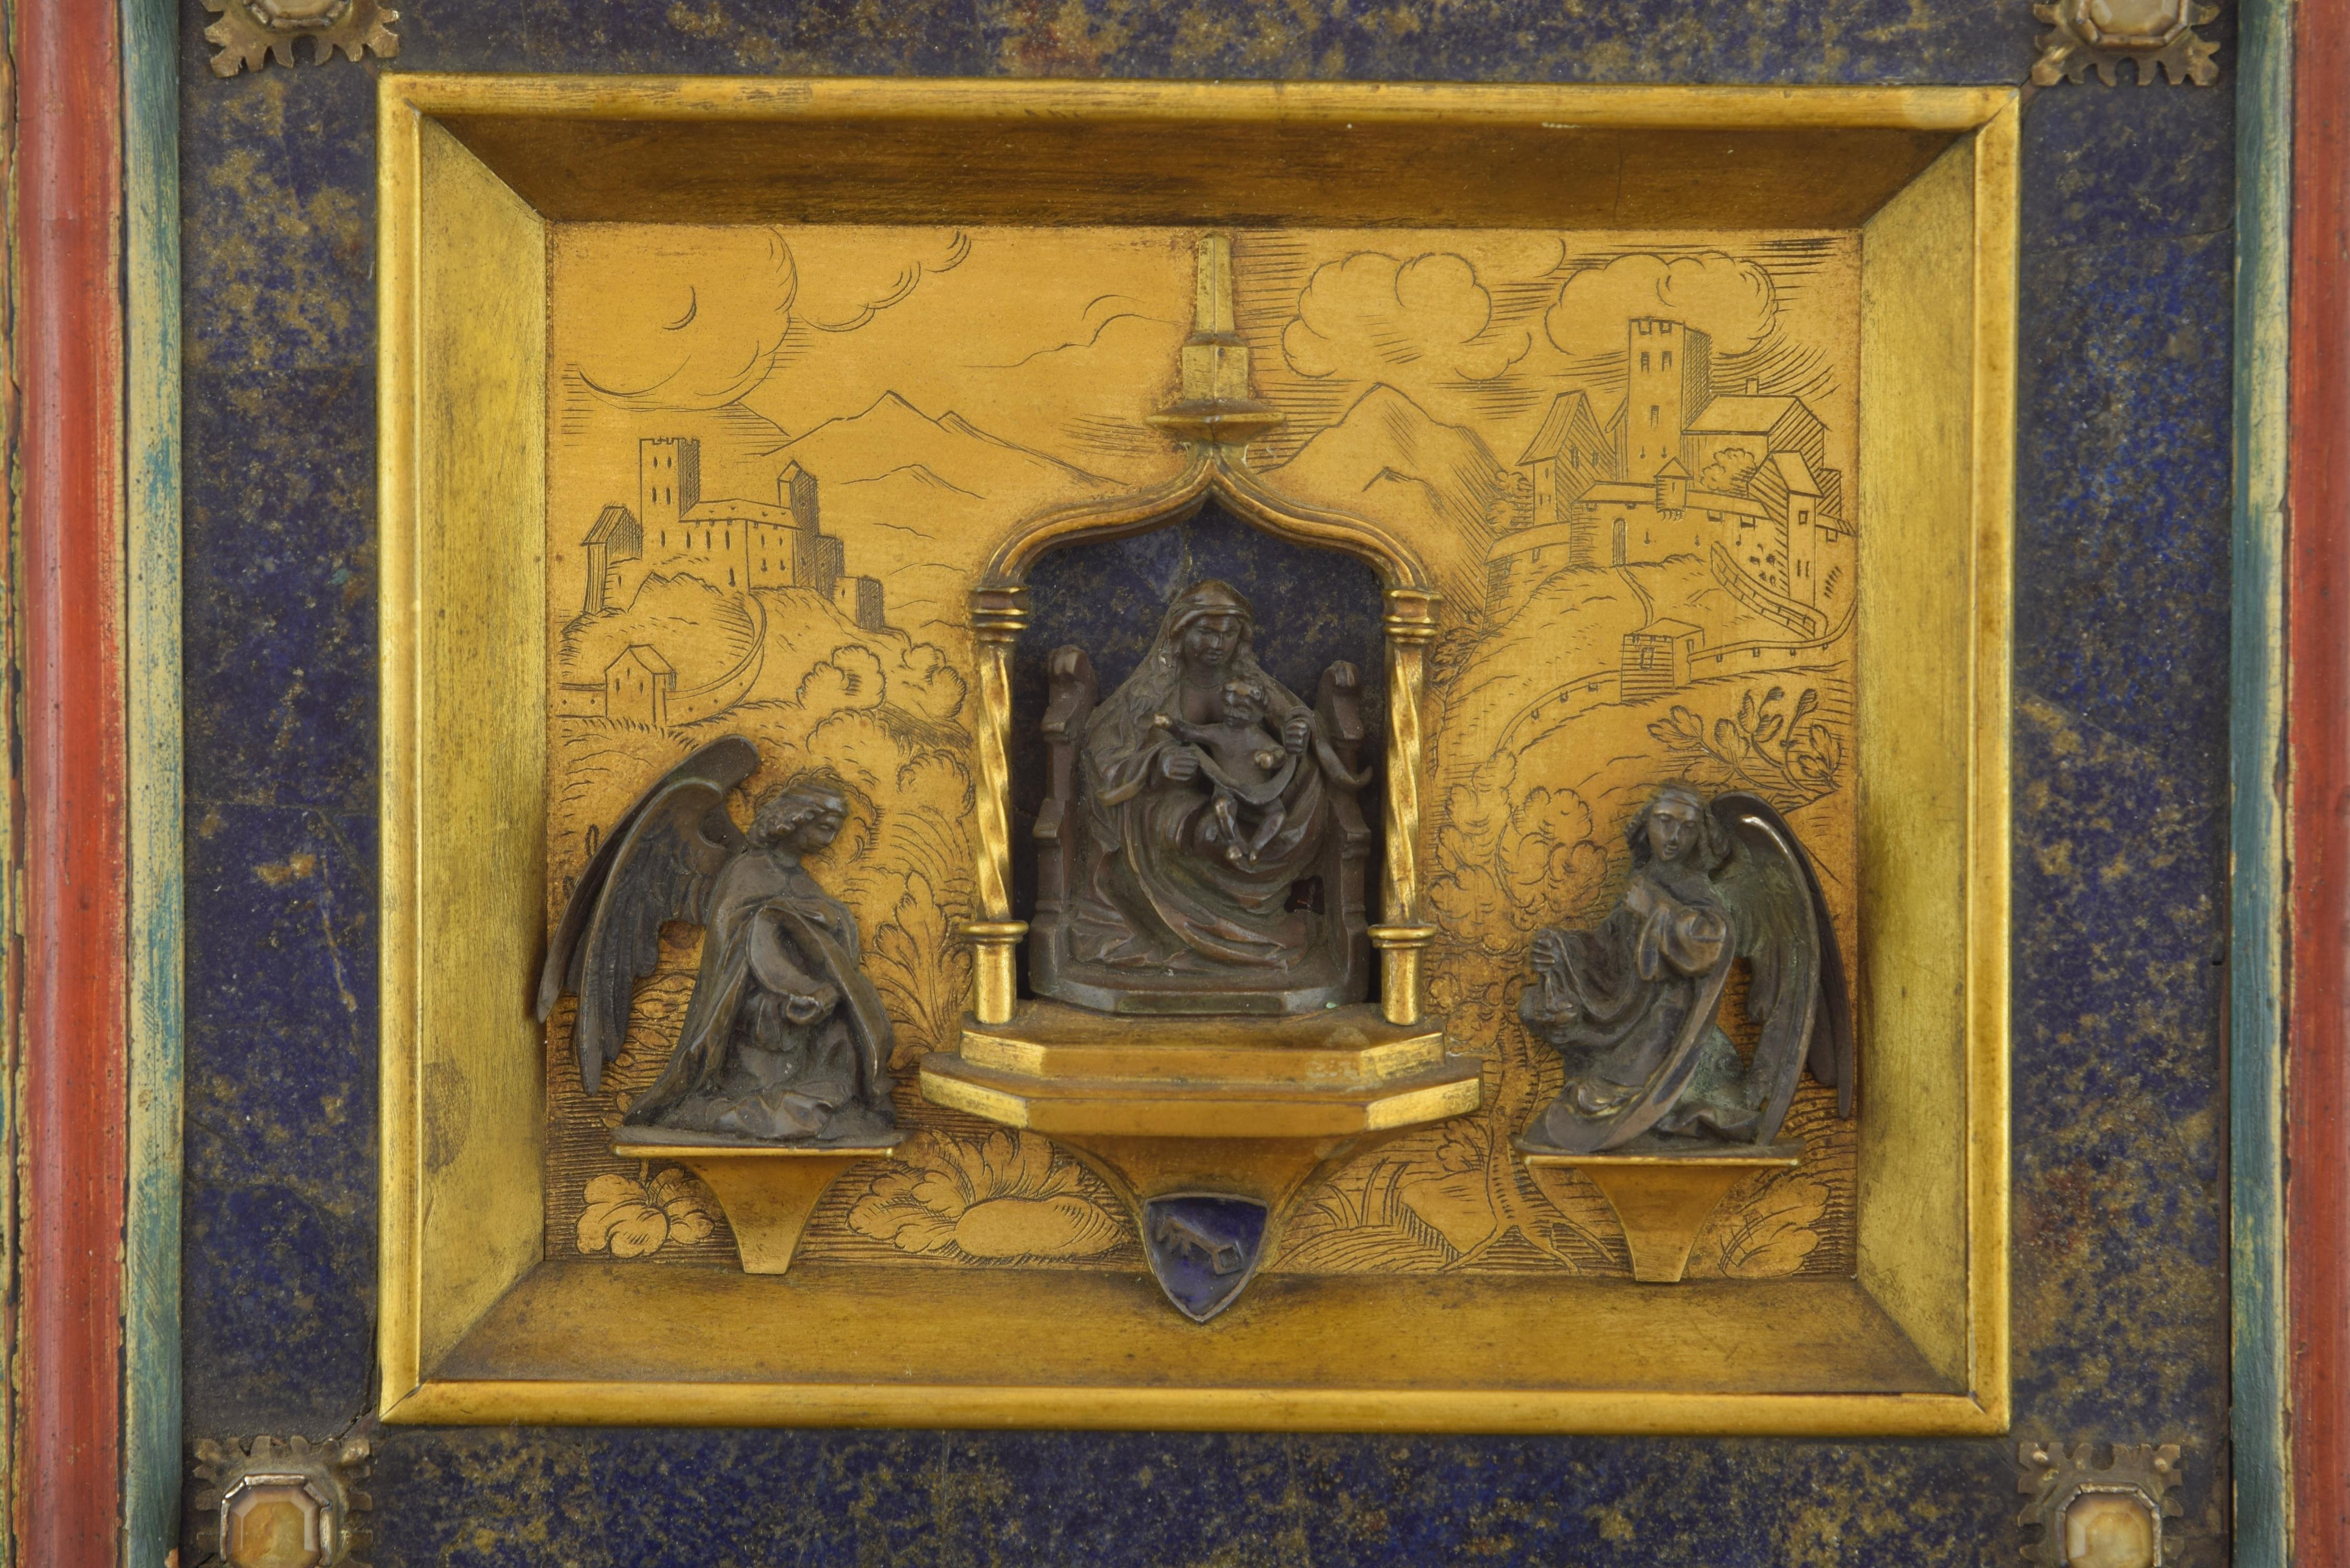 Bronze in its color and gold, lapis lazuli, rock crystal, enamel.
In the centre of the work is presented, enthroned, the figure of Mary, with a mantel (fireplace) on her shoulders and hair and holding on her knees the child, who appears addressing